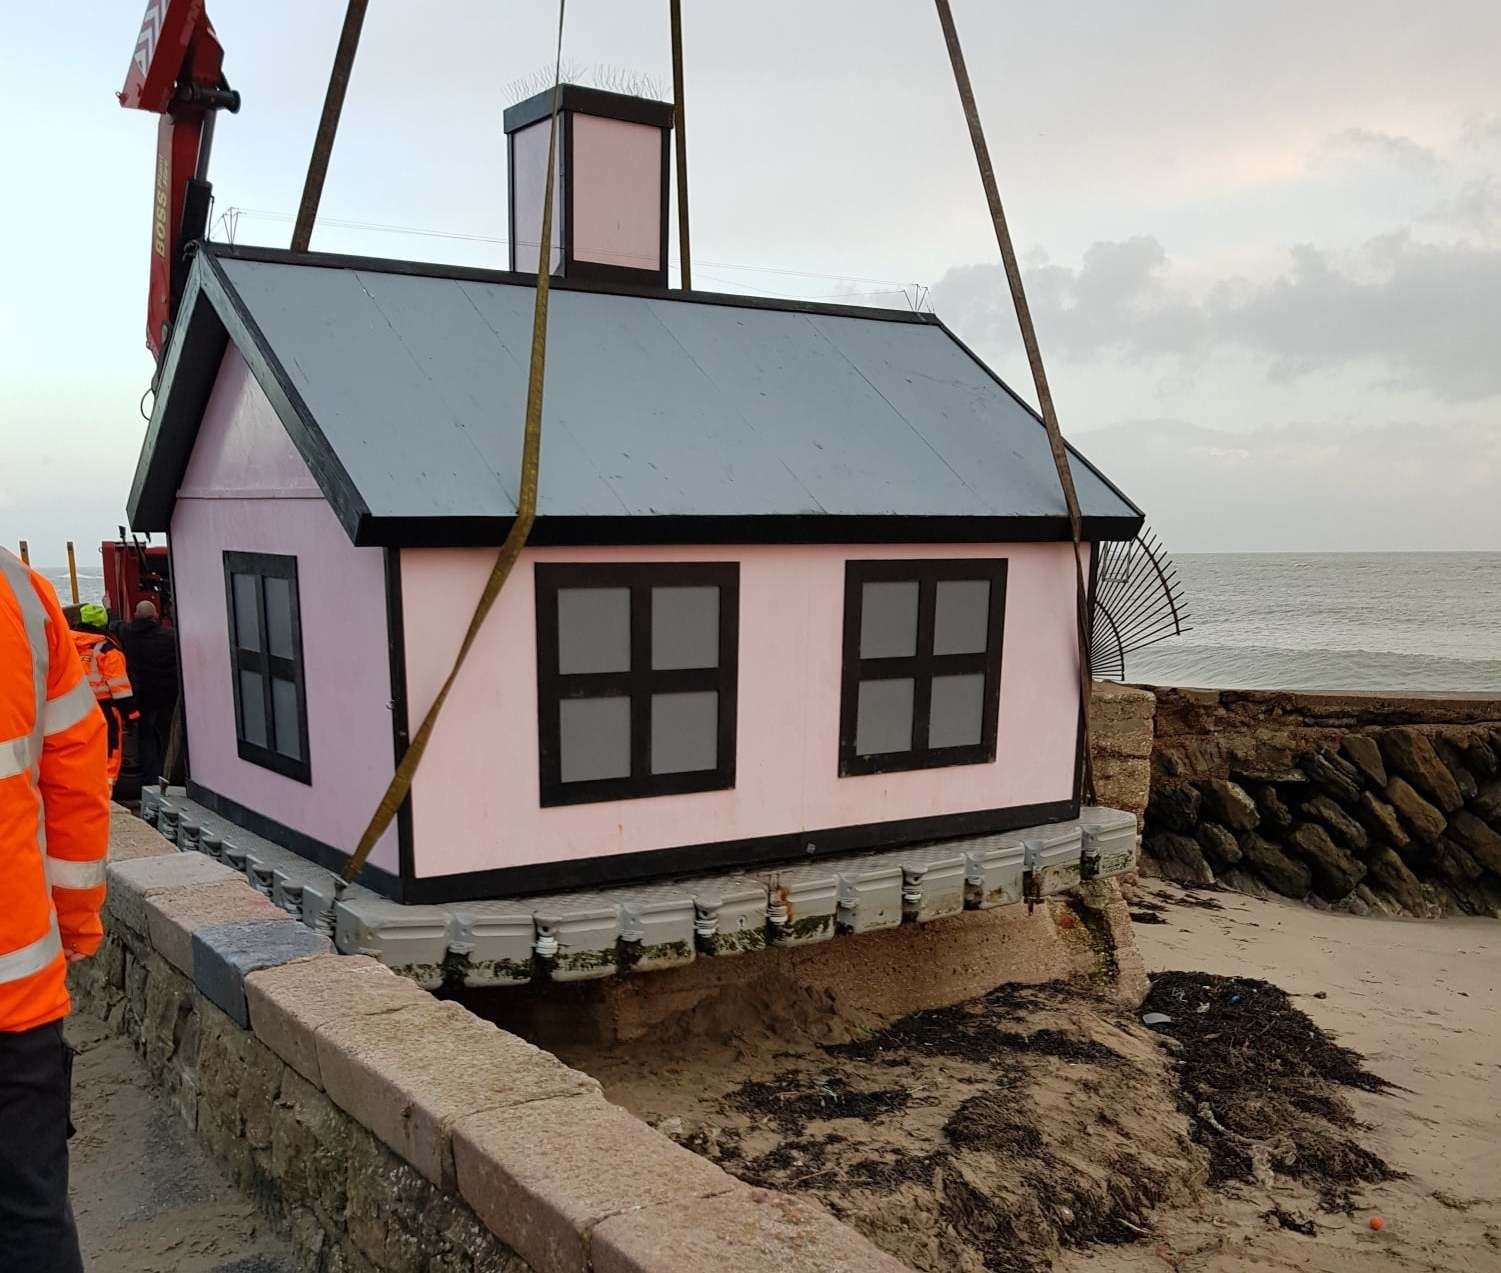 Crews managed to secure the house before it made its way to sea. Picture: Folkestone Rescue